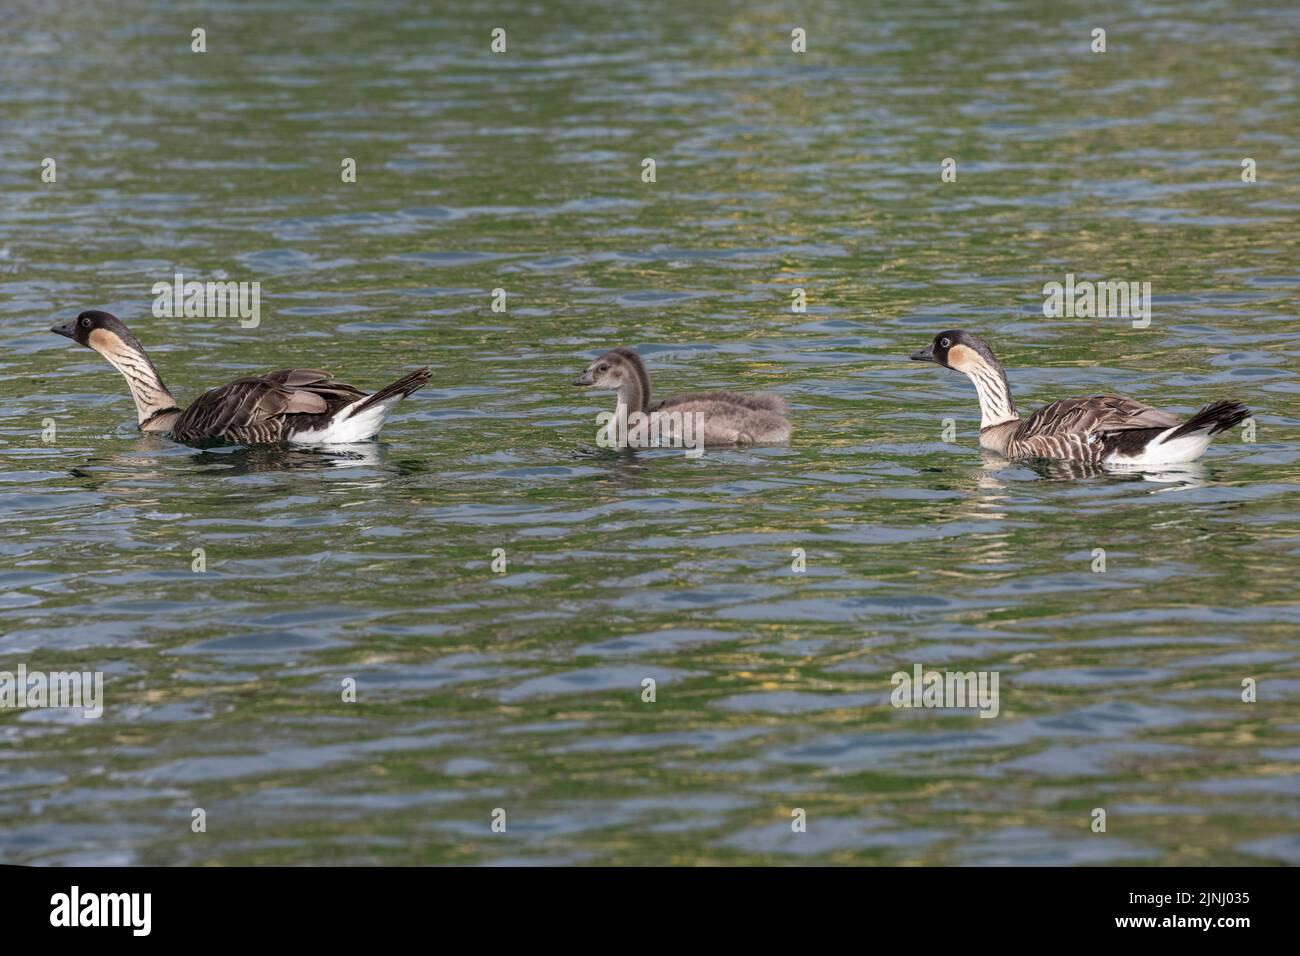 nene or Hawaiian goose, Branta sandvicensis ( endemic species ), the world's rarest goose, adults swimming with large chicks or goslings, Kona, Hawaii Stock Photo